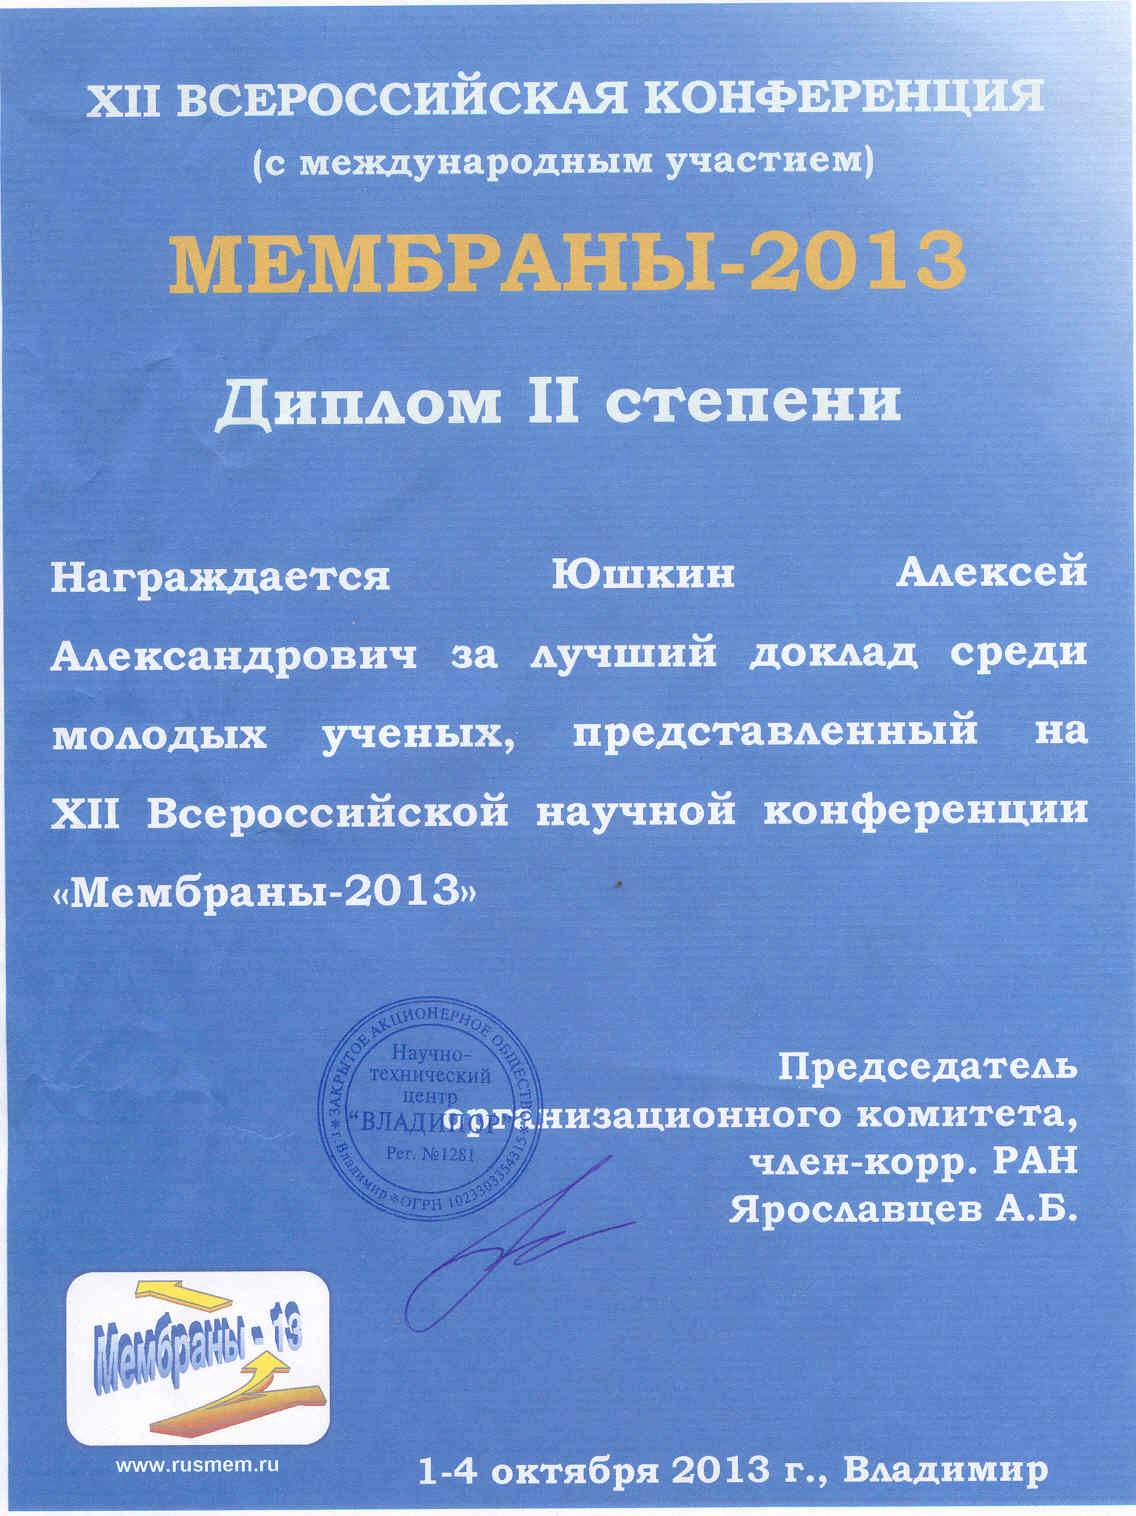 2-nd grade diploma for the best poster presentation among young scientists during the XII Russian scientific conference Membranes 2013